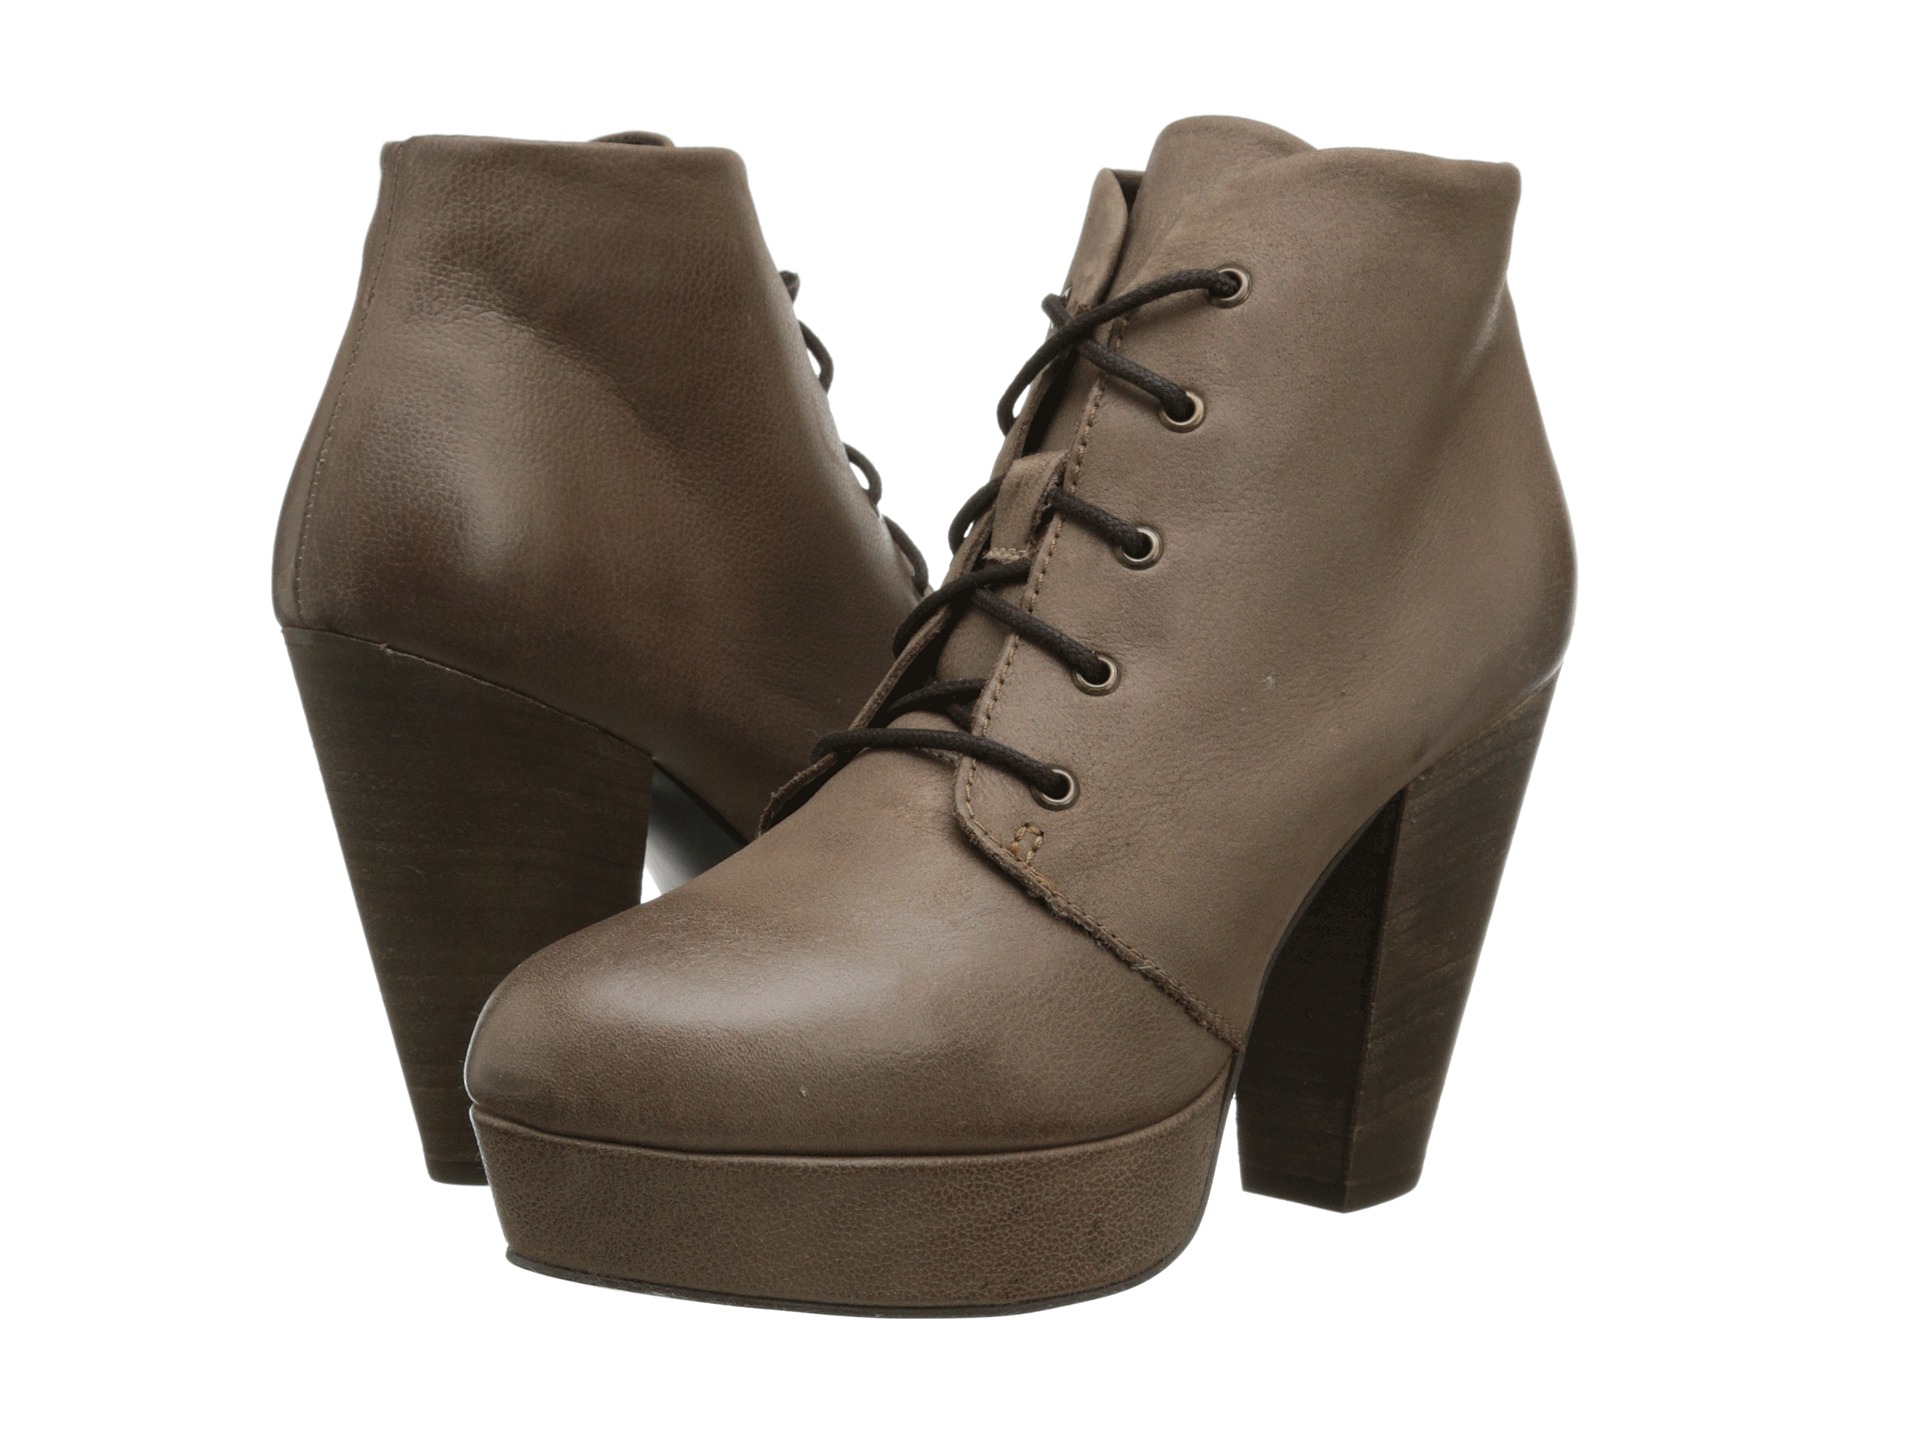 Steve Madden Raspy Stone Leather, Shoes | Shipped Free at Zappos